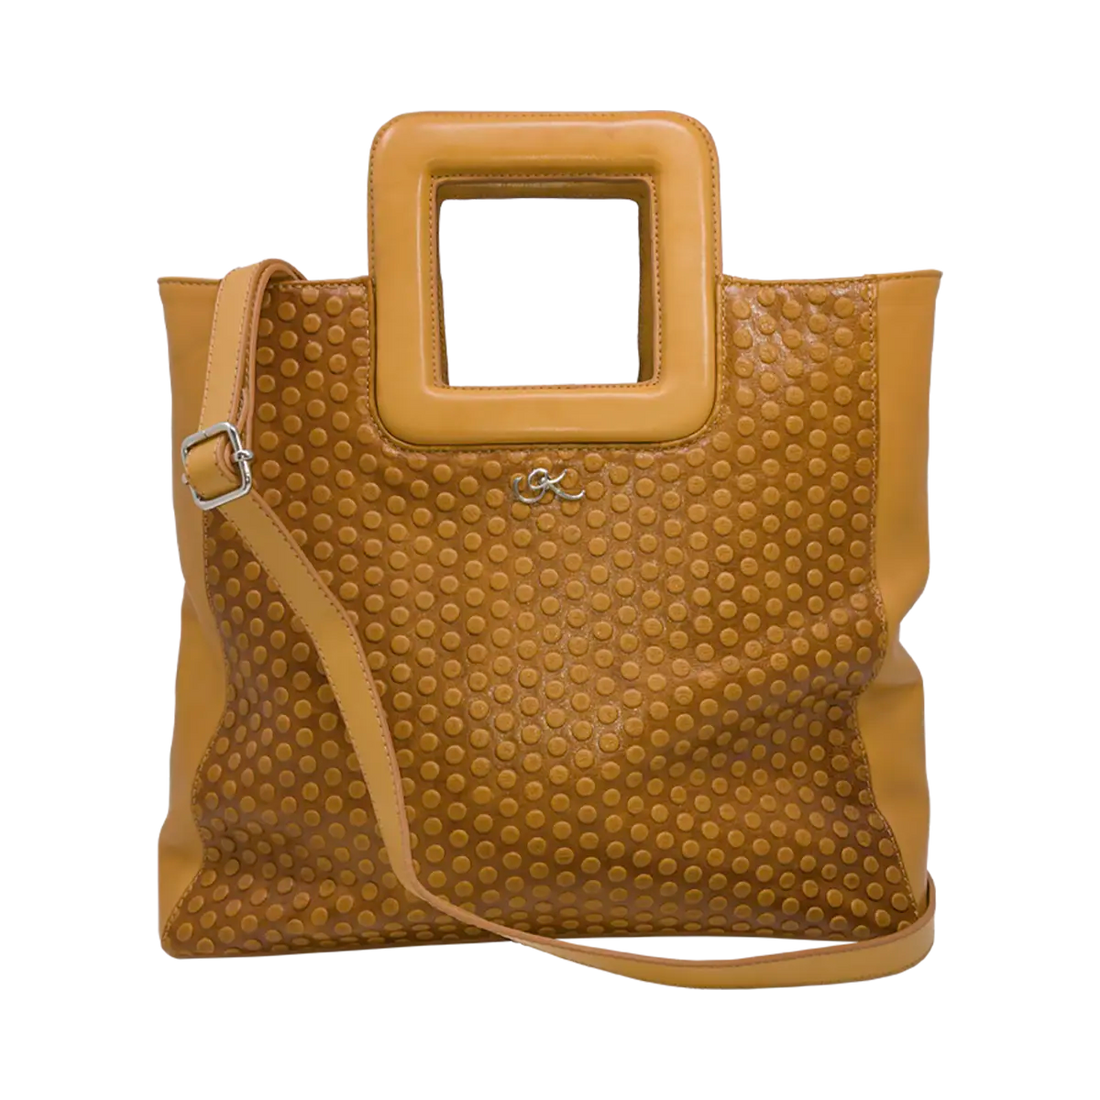 large tan circle leather print handbag with a square handle. Accessory for women in San Diego, CA.